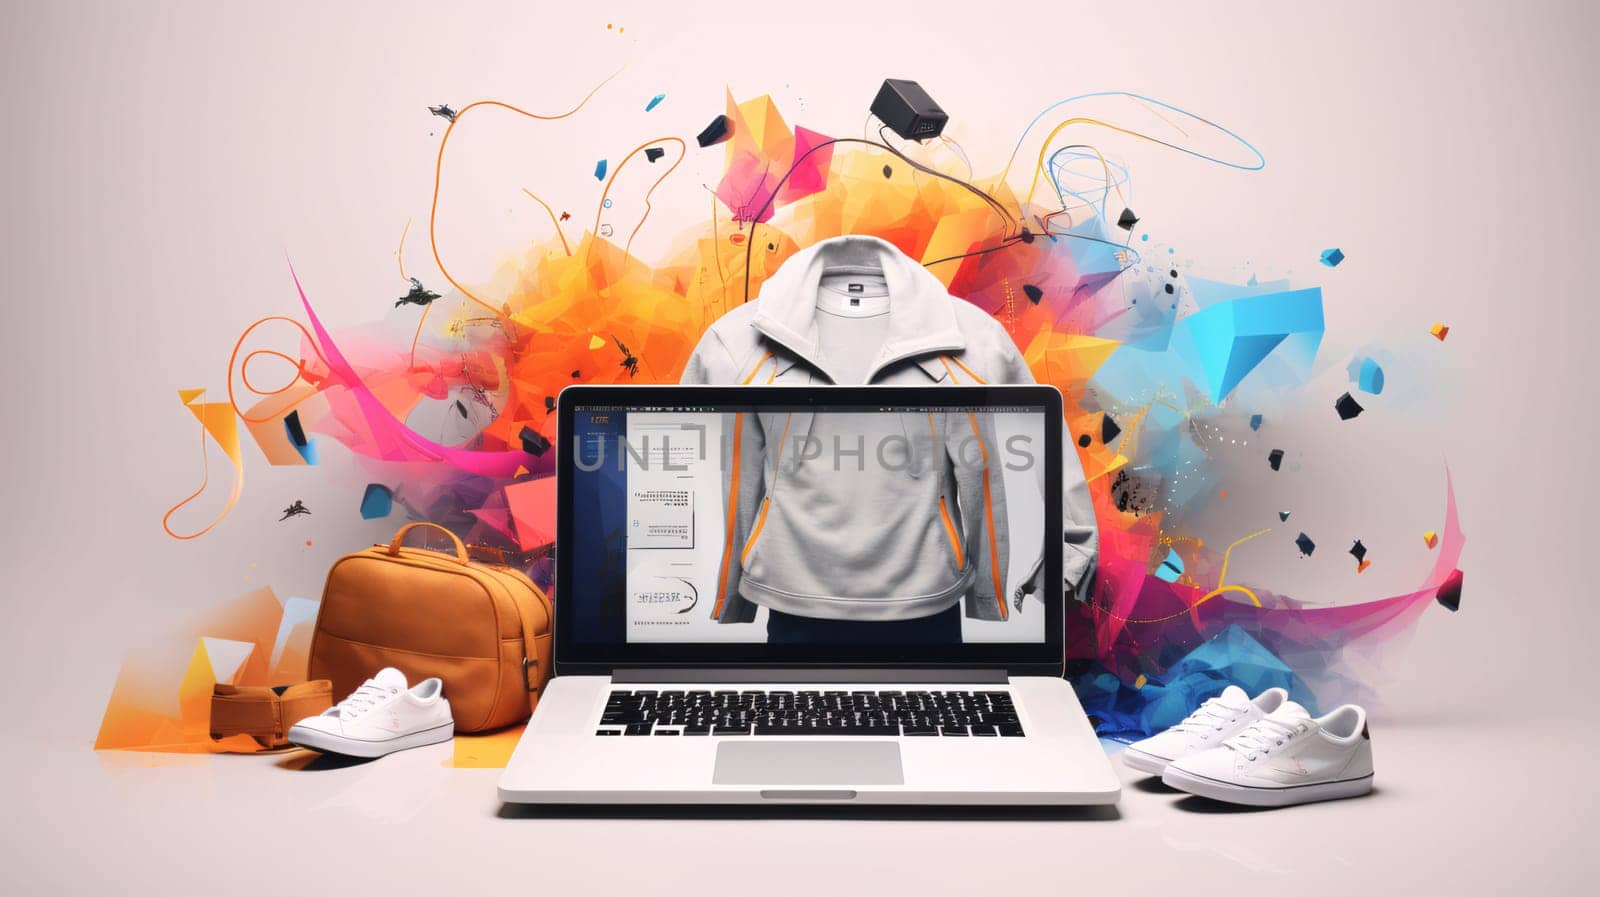 Banner: A hooded man with a hoodie standing in front of a laptop with a lot of colorful doodles